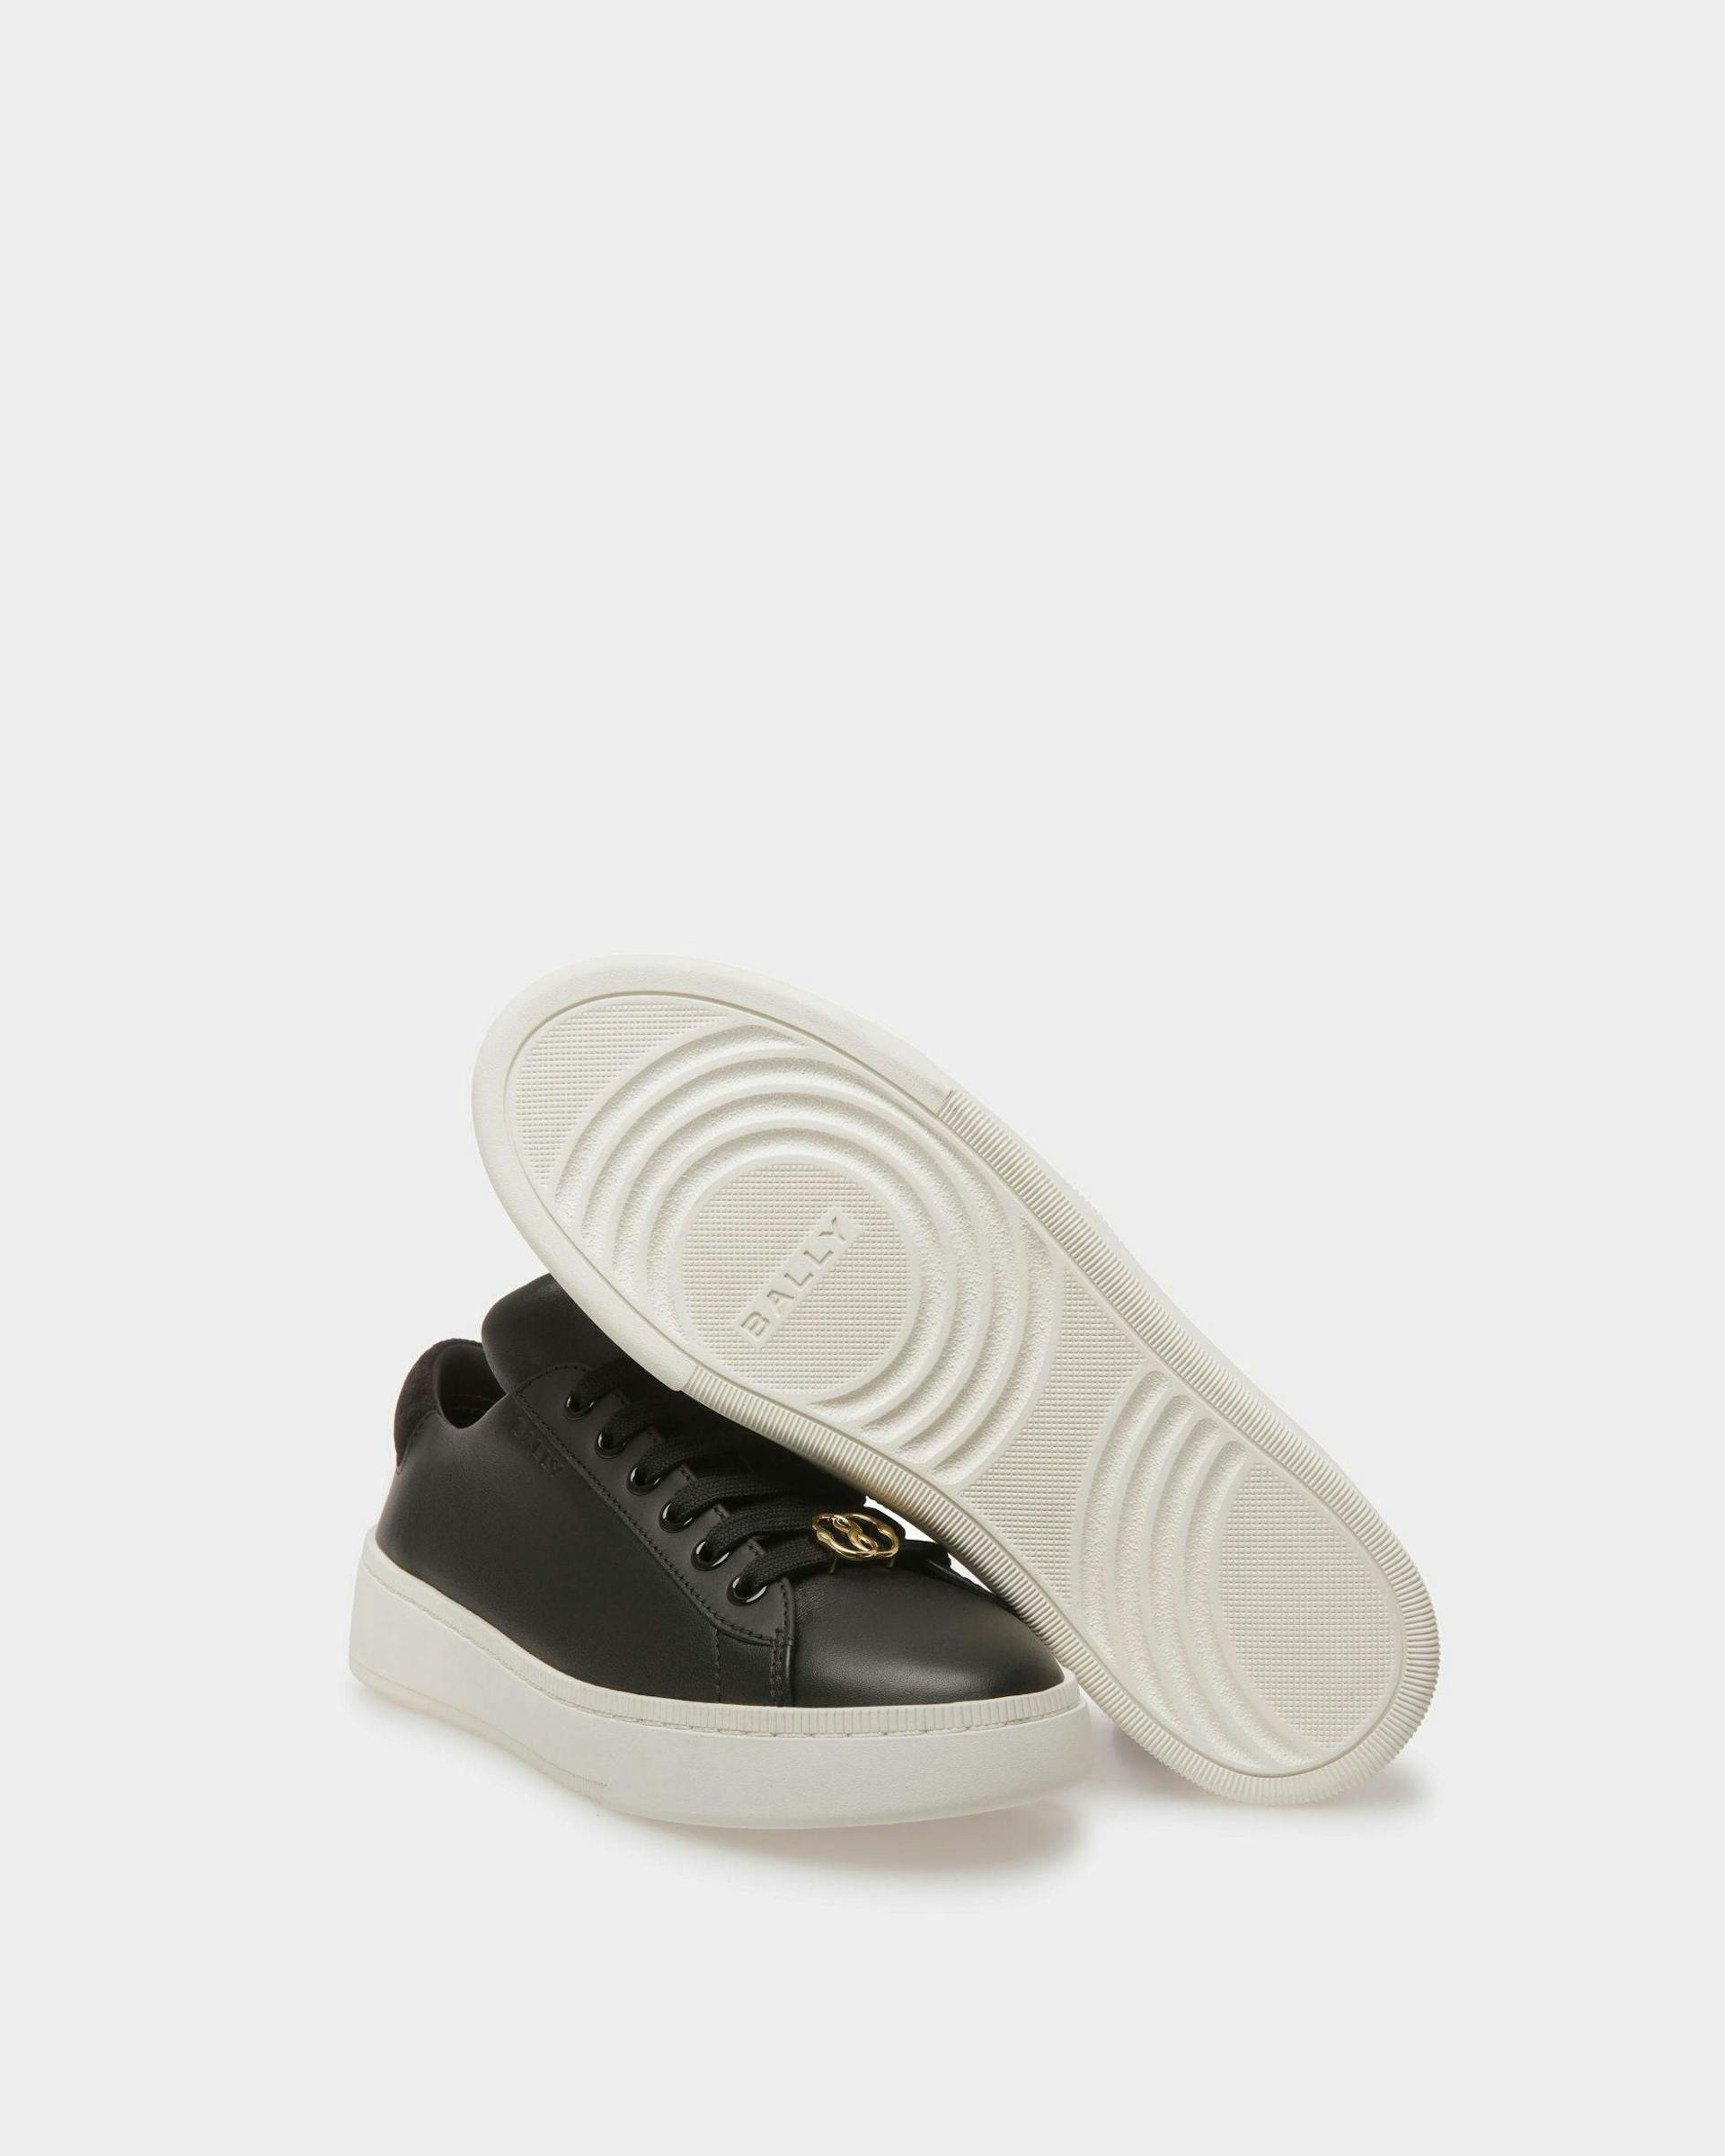 Women's Raise Sneakers In Black And White Leather | Bally | Still Life Detail